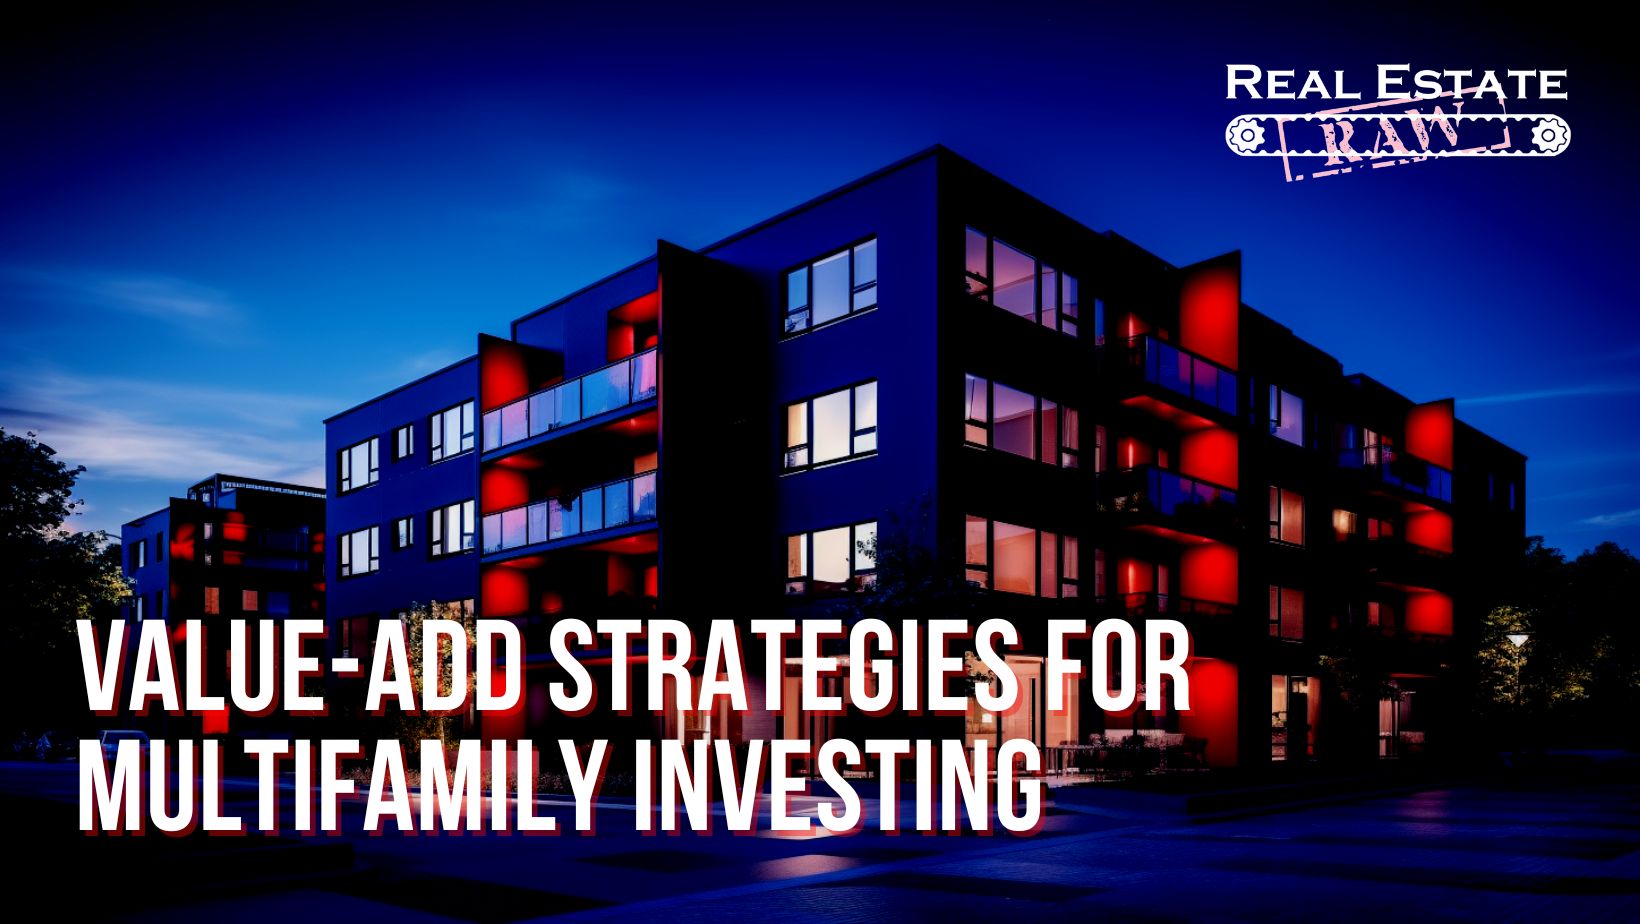 Value-Add Strategies for Multifamily Investing